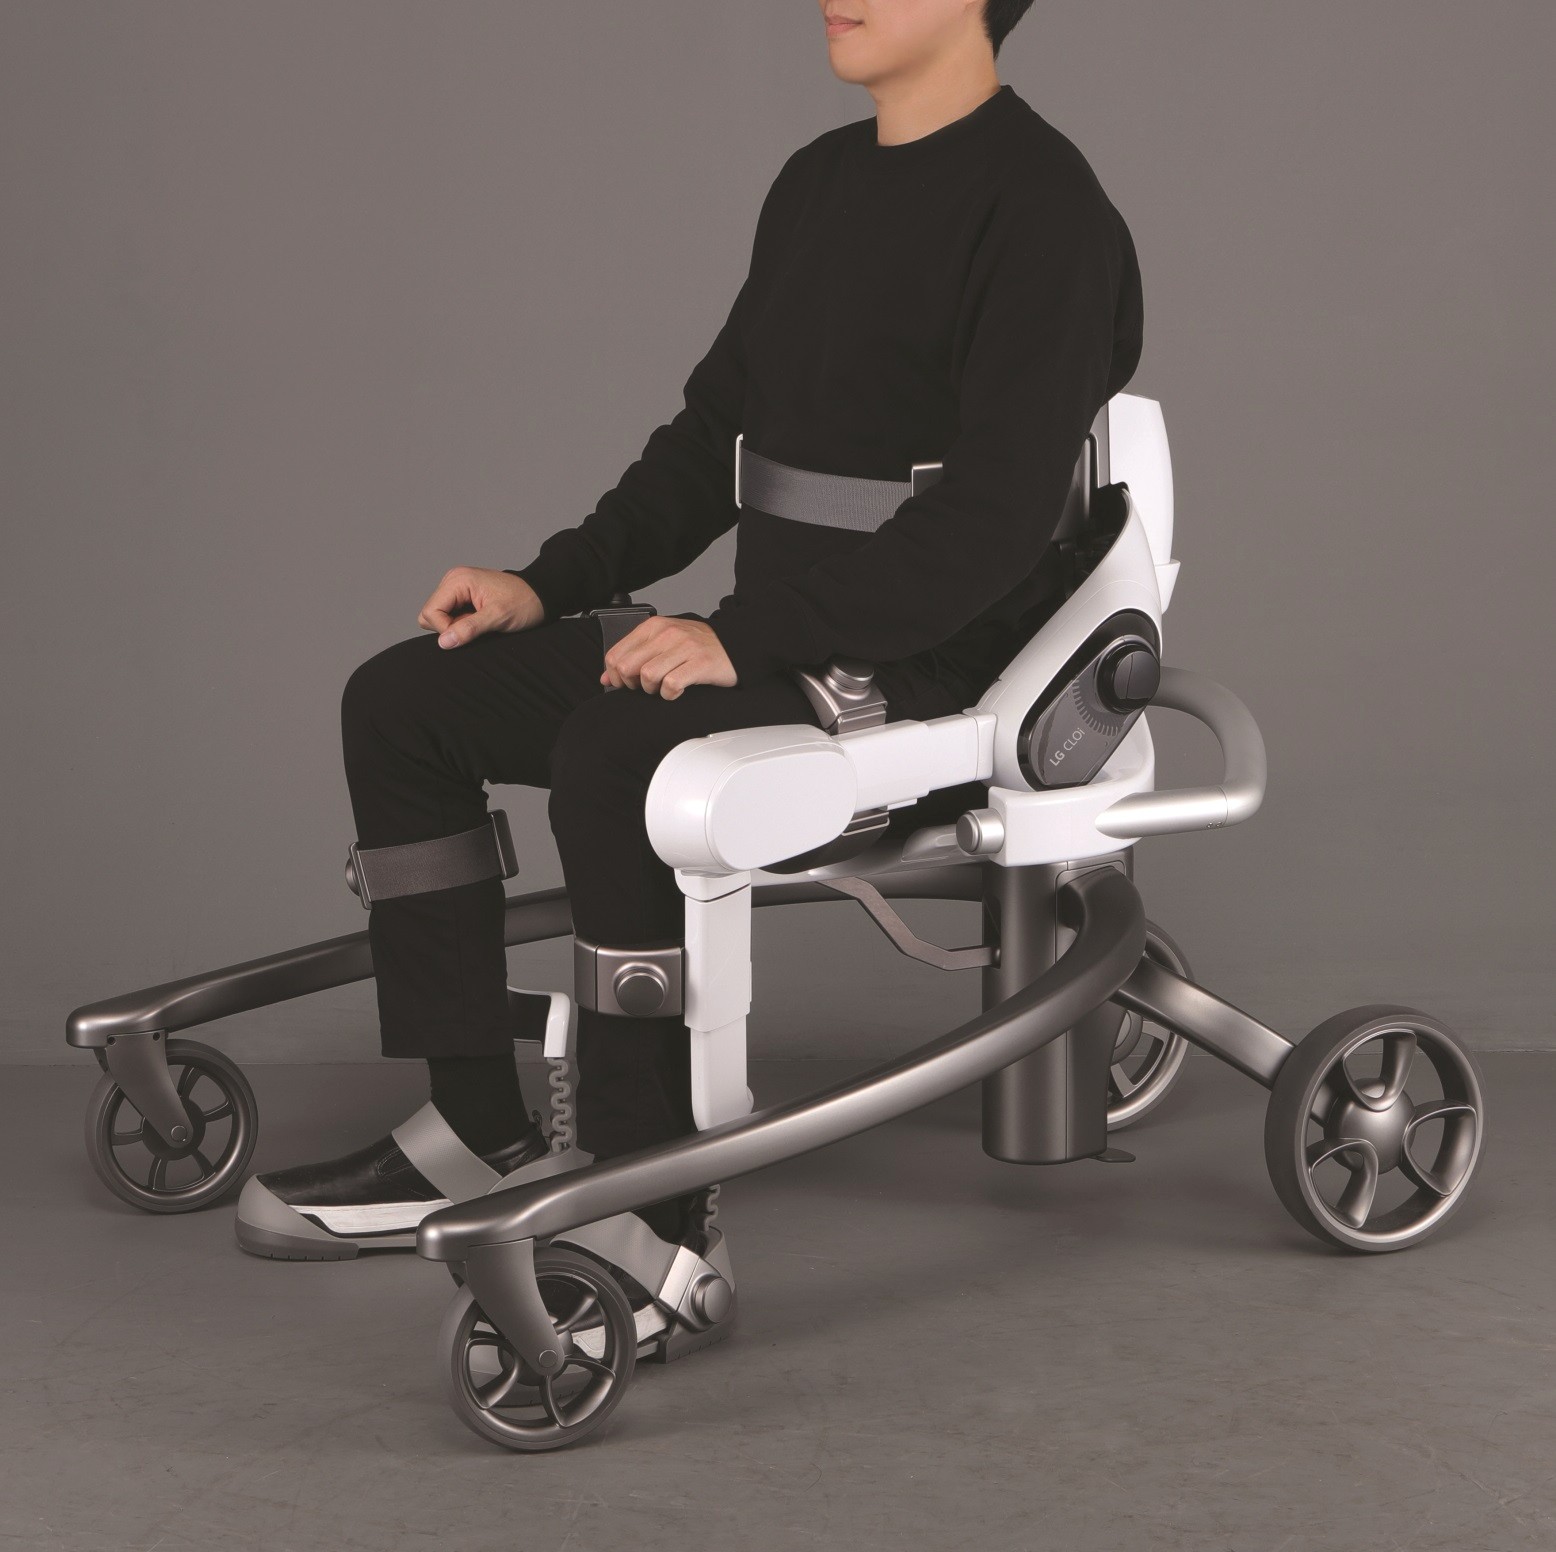 Side view of man seated on LG CLOi SuitBot